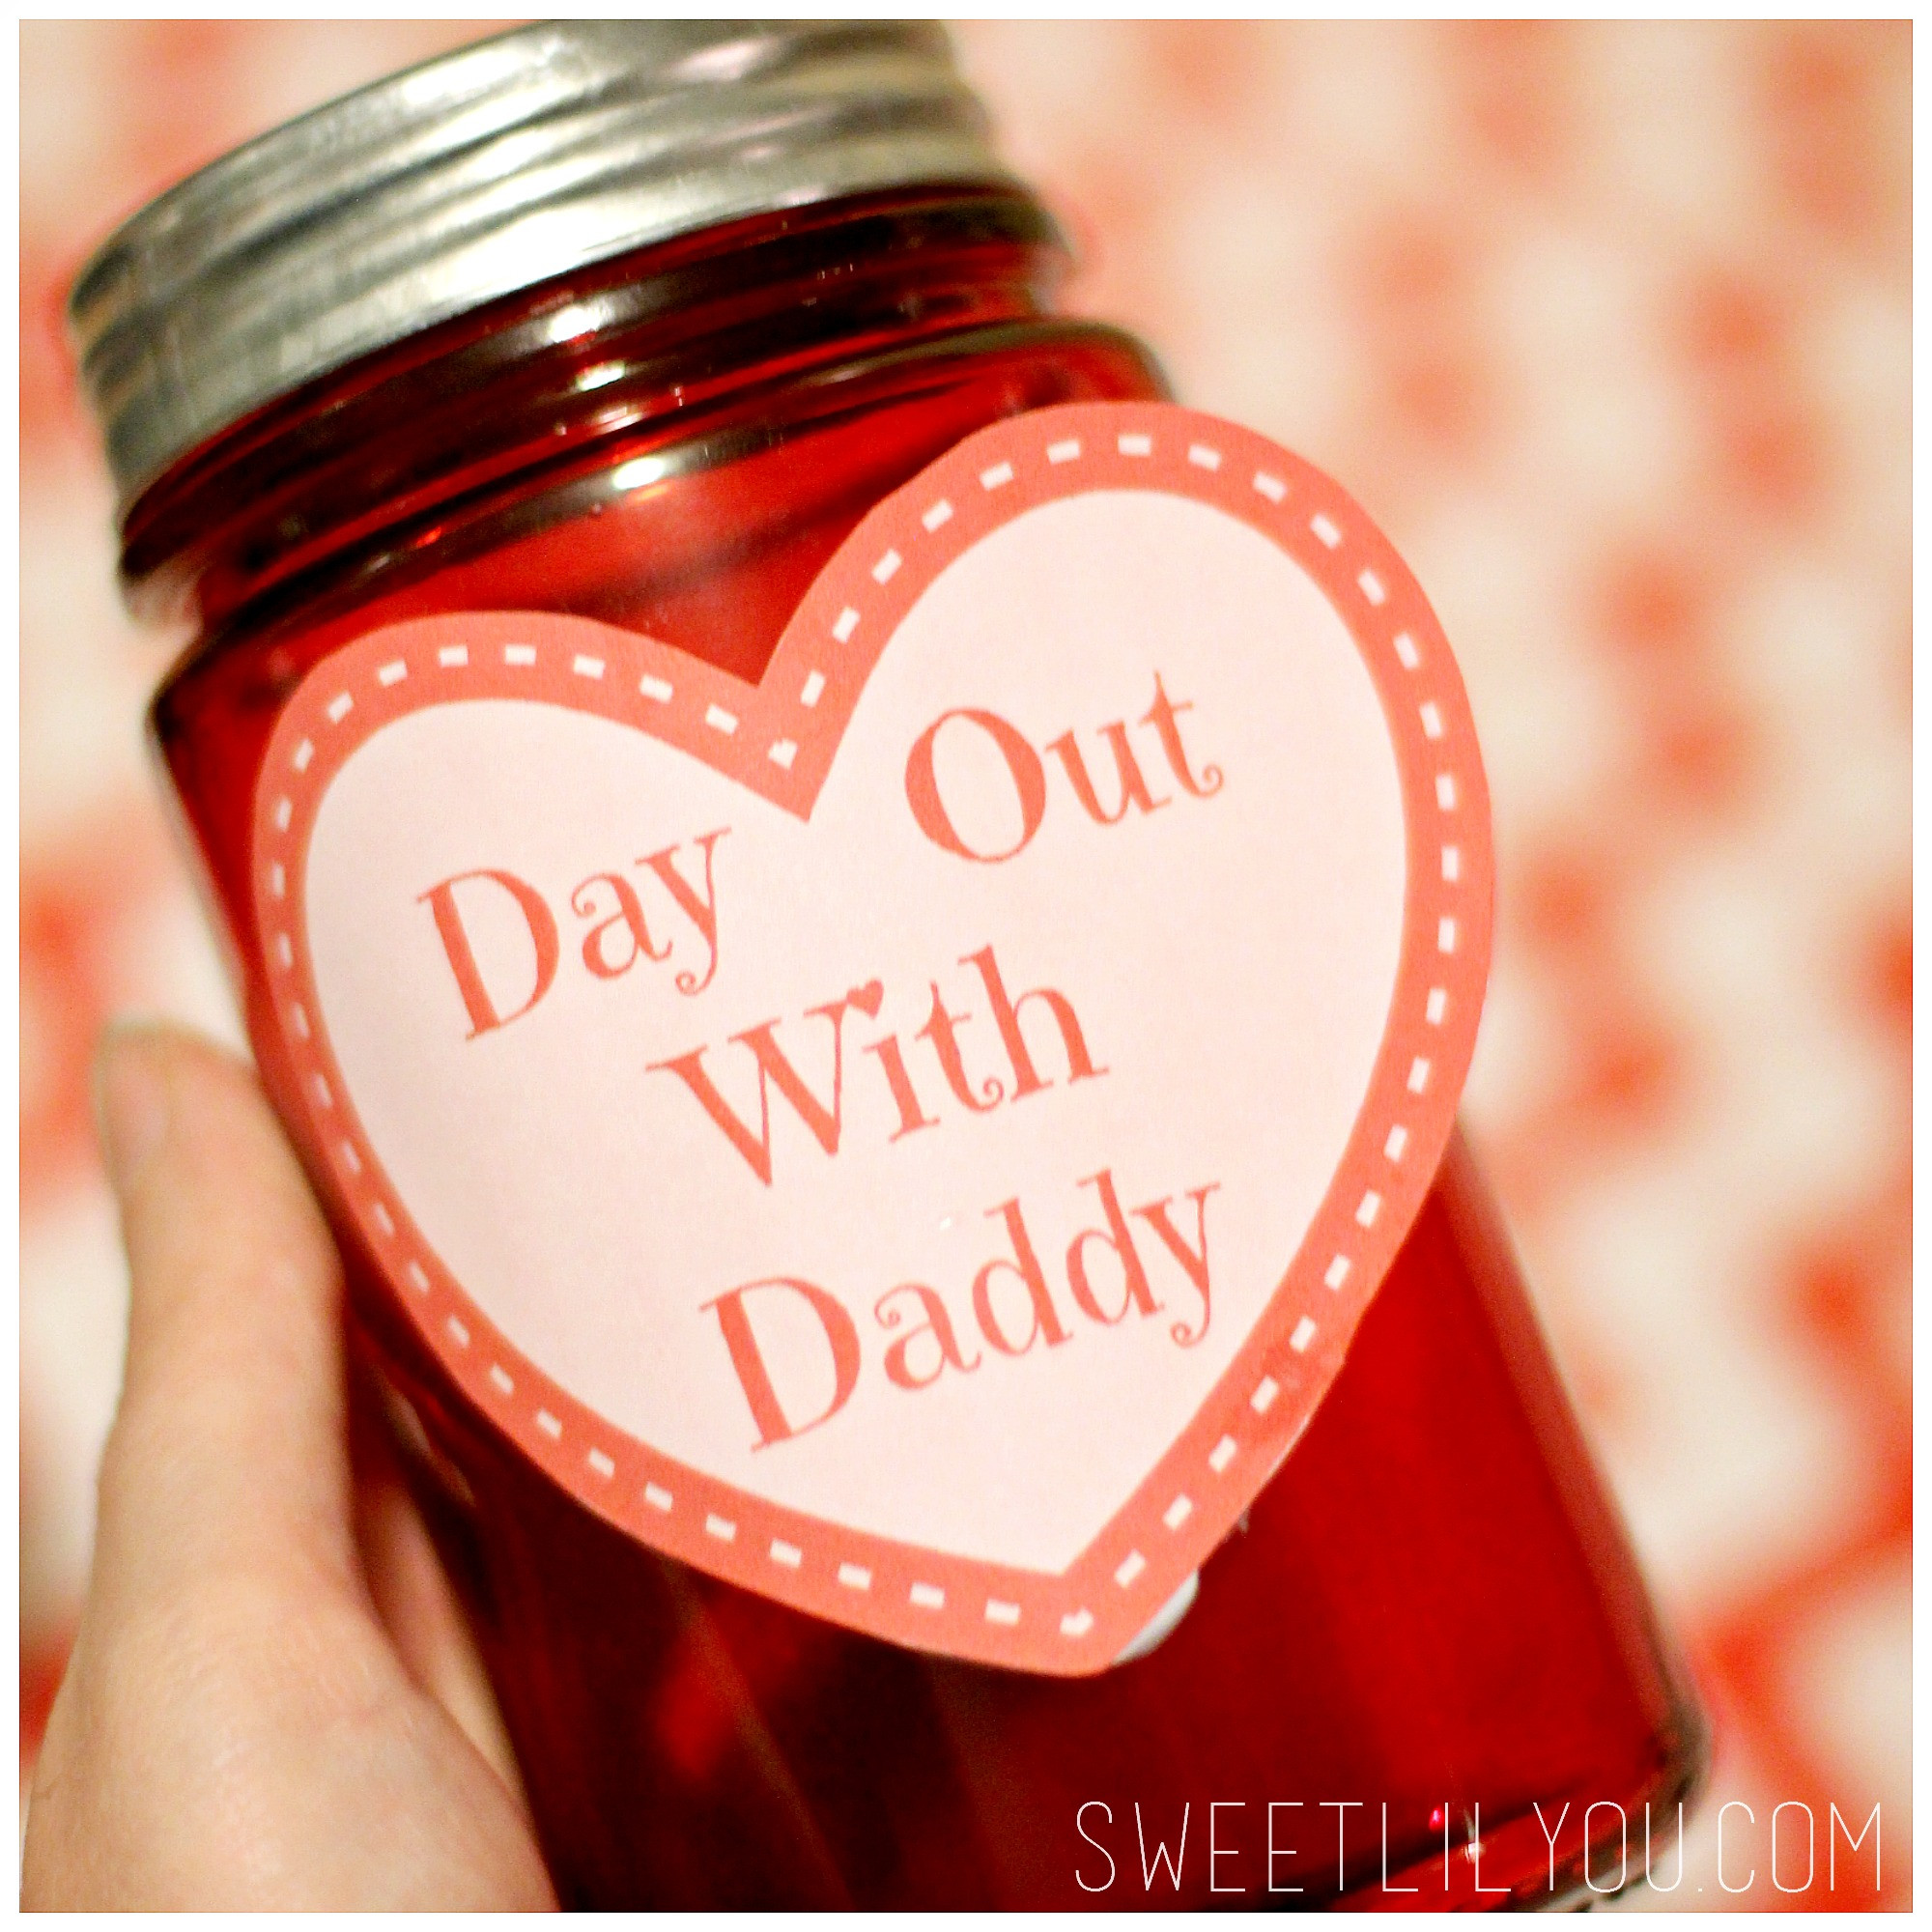 Father Daughter Valentine Gift Ideas
 Day Out With Daddy Jar Valentine s Day Gift for Dad